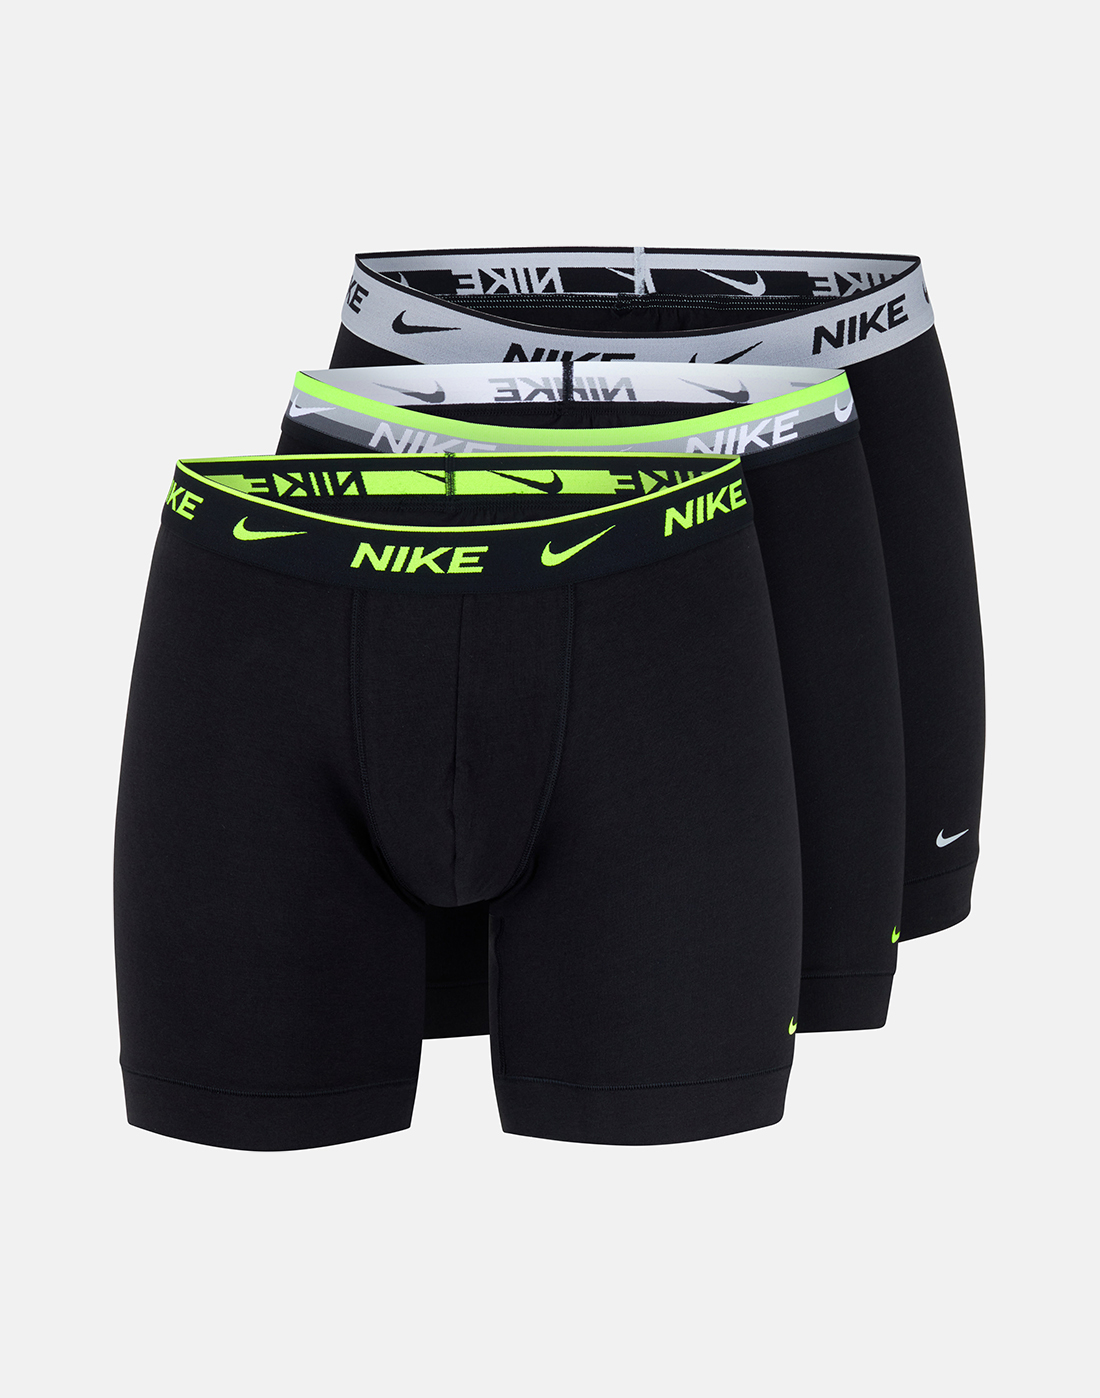 Nike Mens Cotton Stretch 3 Pack Boxer Briefs - Black | Life Style Sports UK